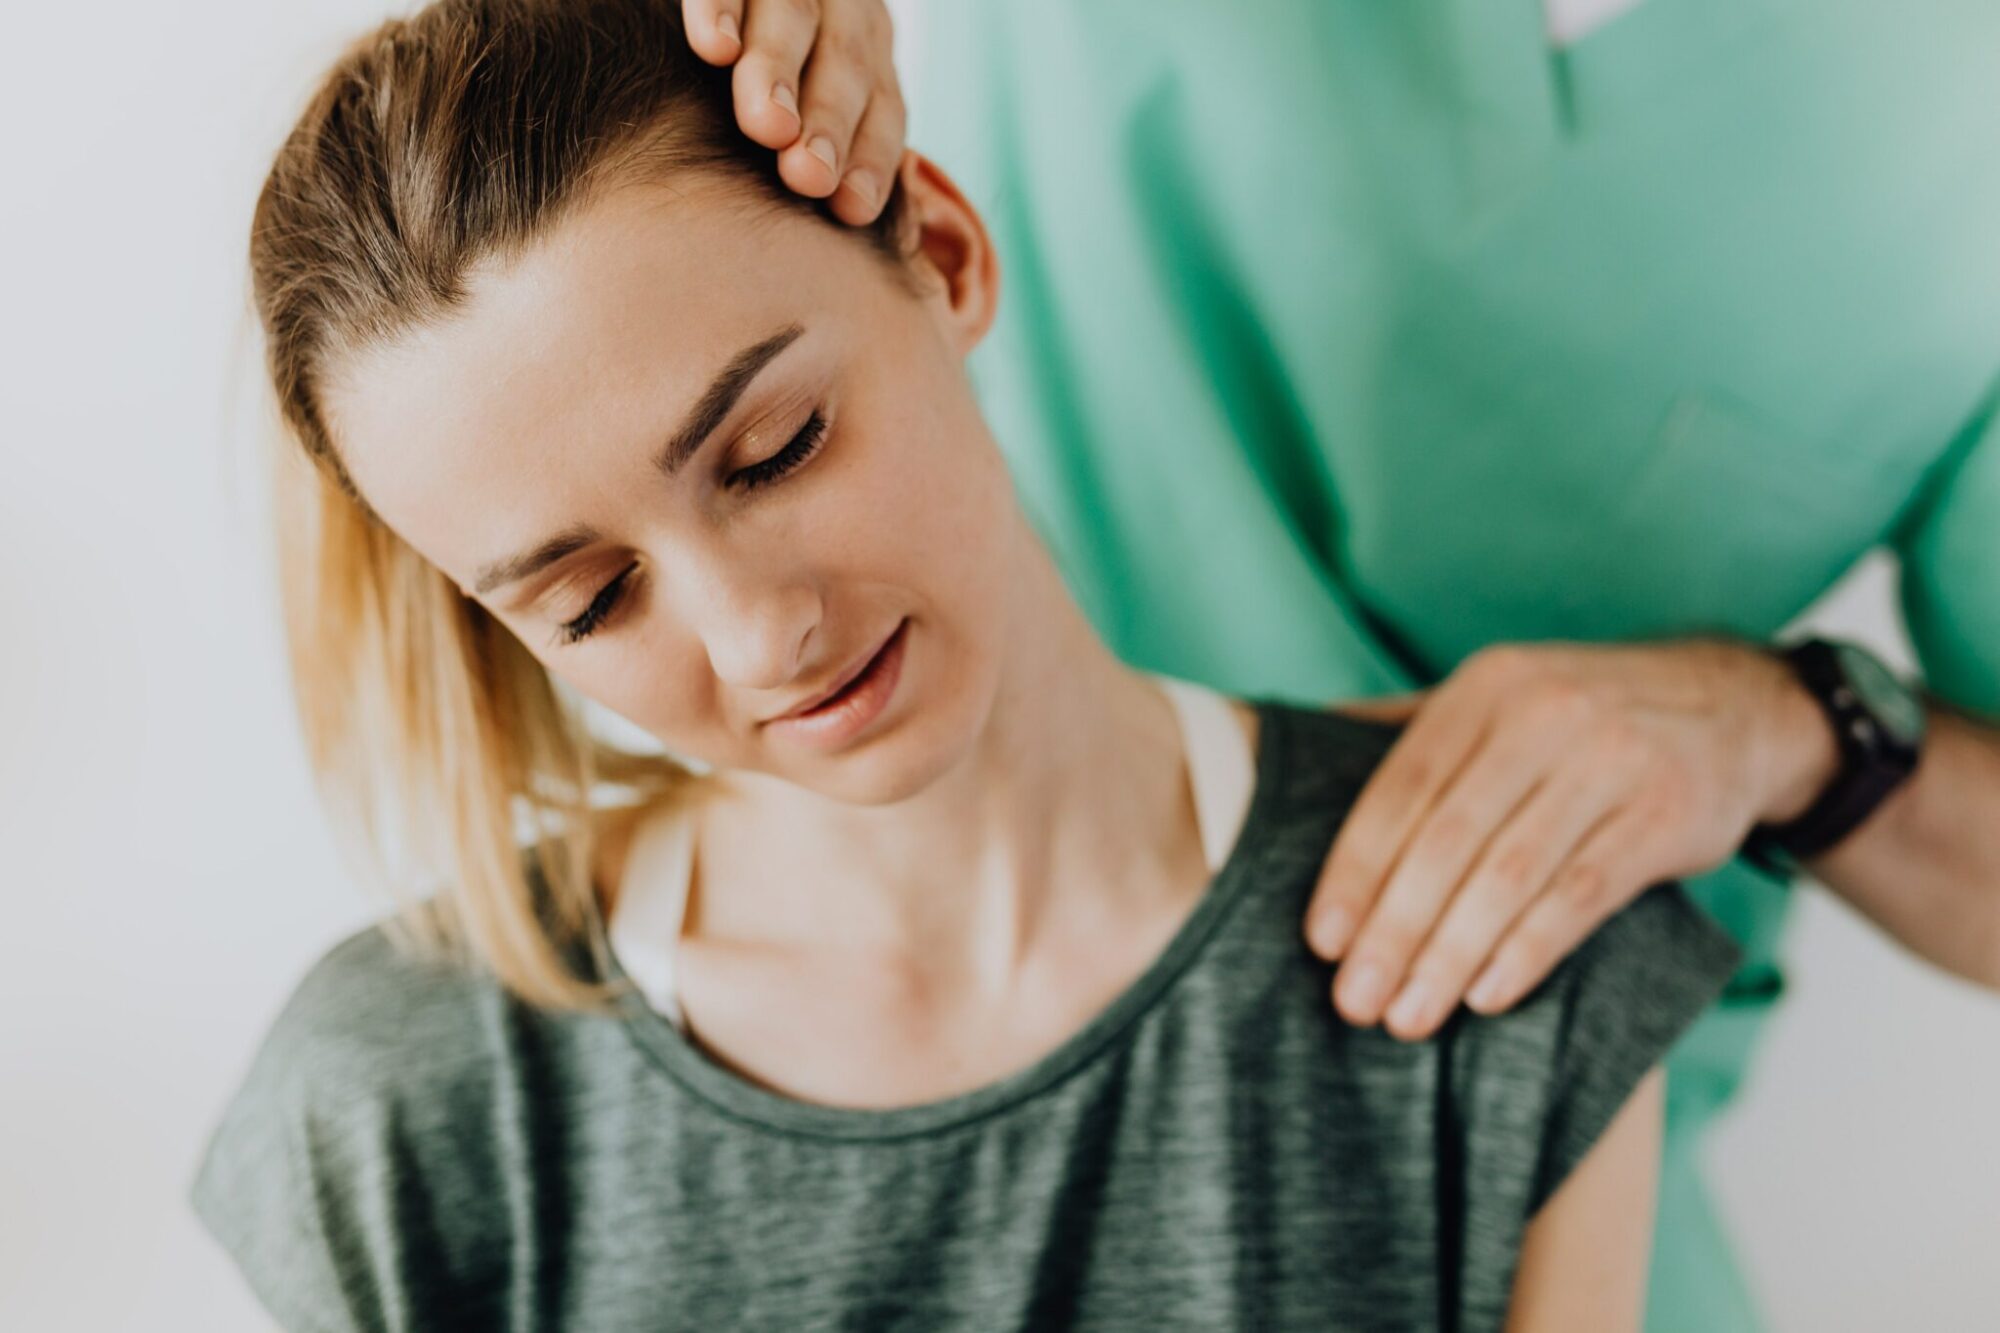 Young woman receiving neck adjustment from chiropractor